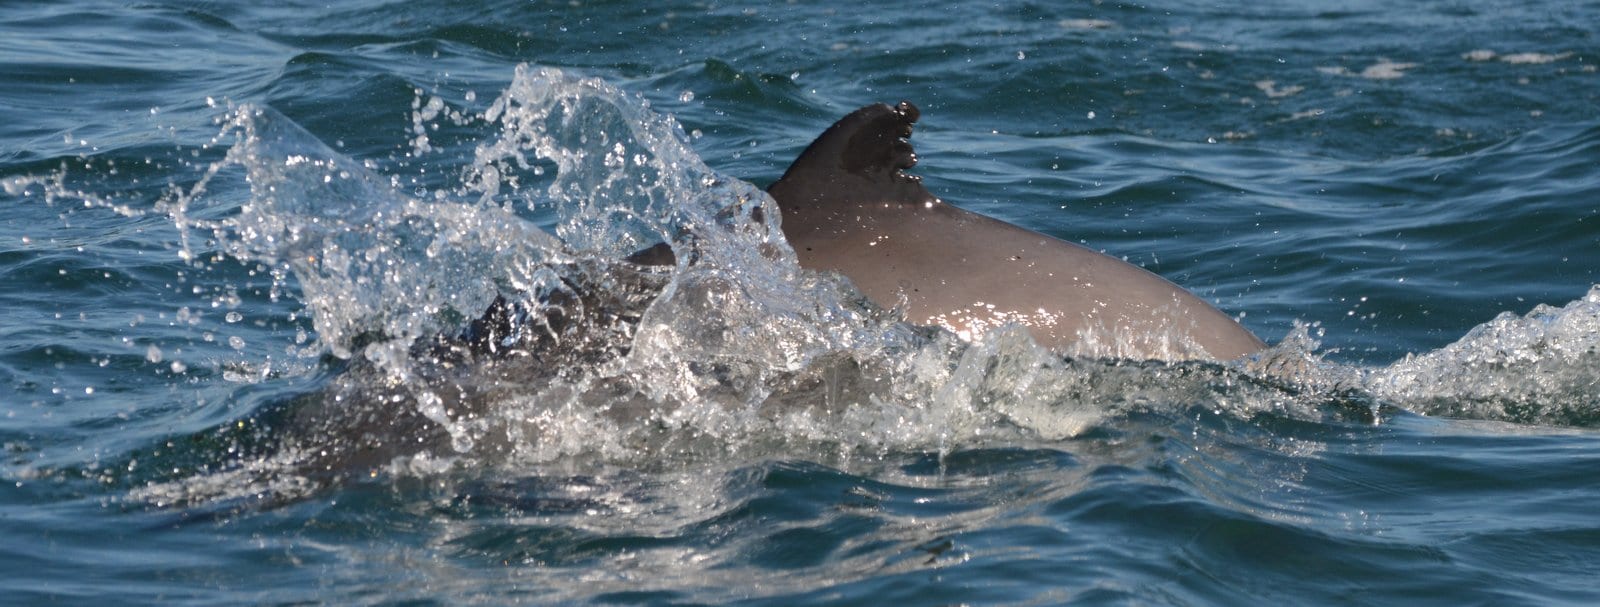 harbour porpoise, check out the dorsal fin, looks like this little one survived an attack from a predator, maybe a shark 